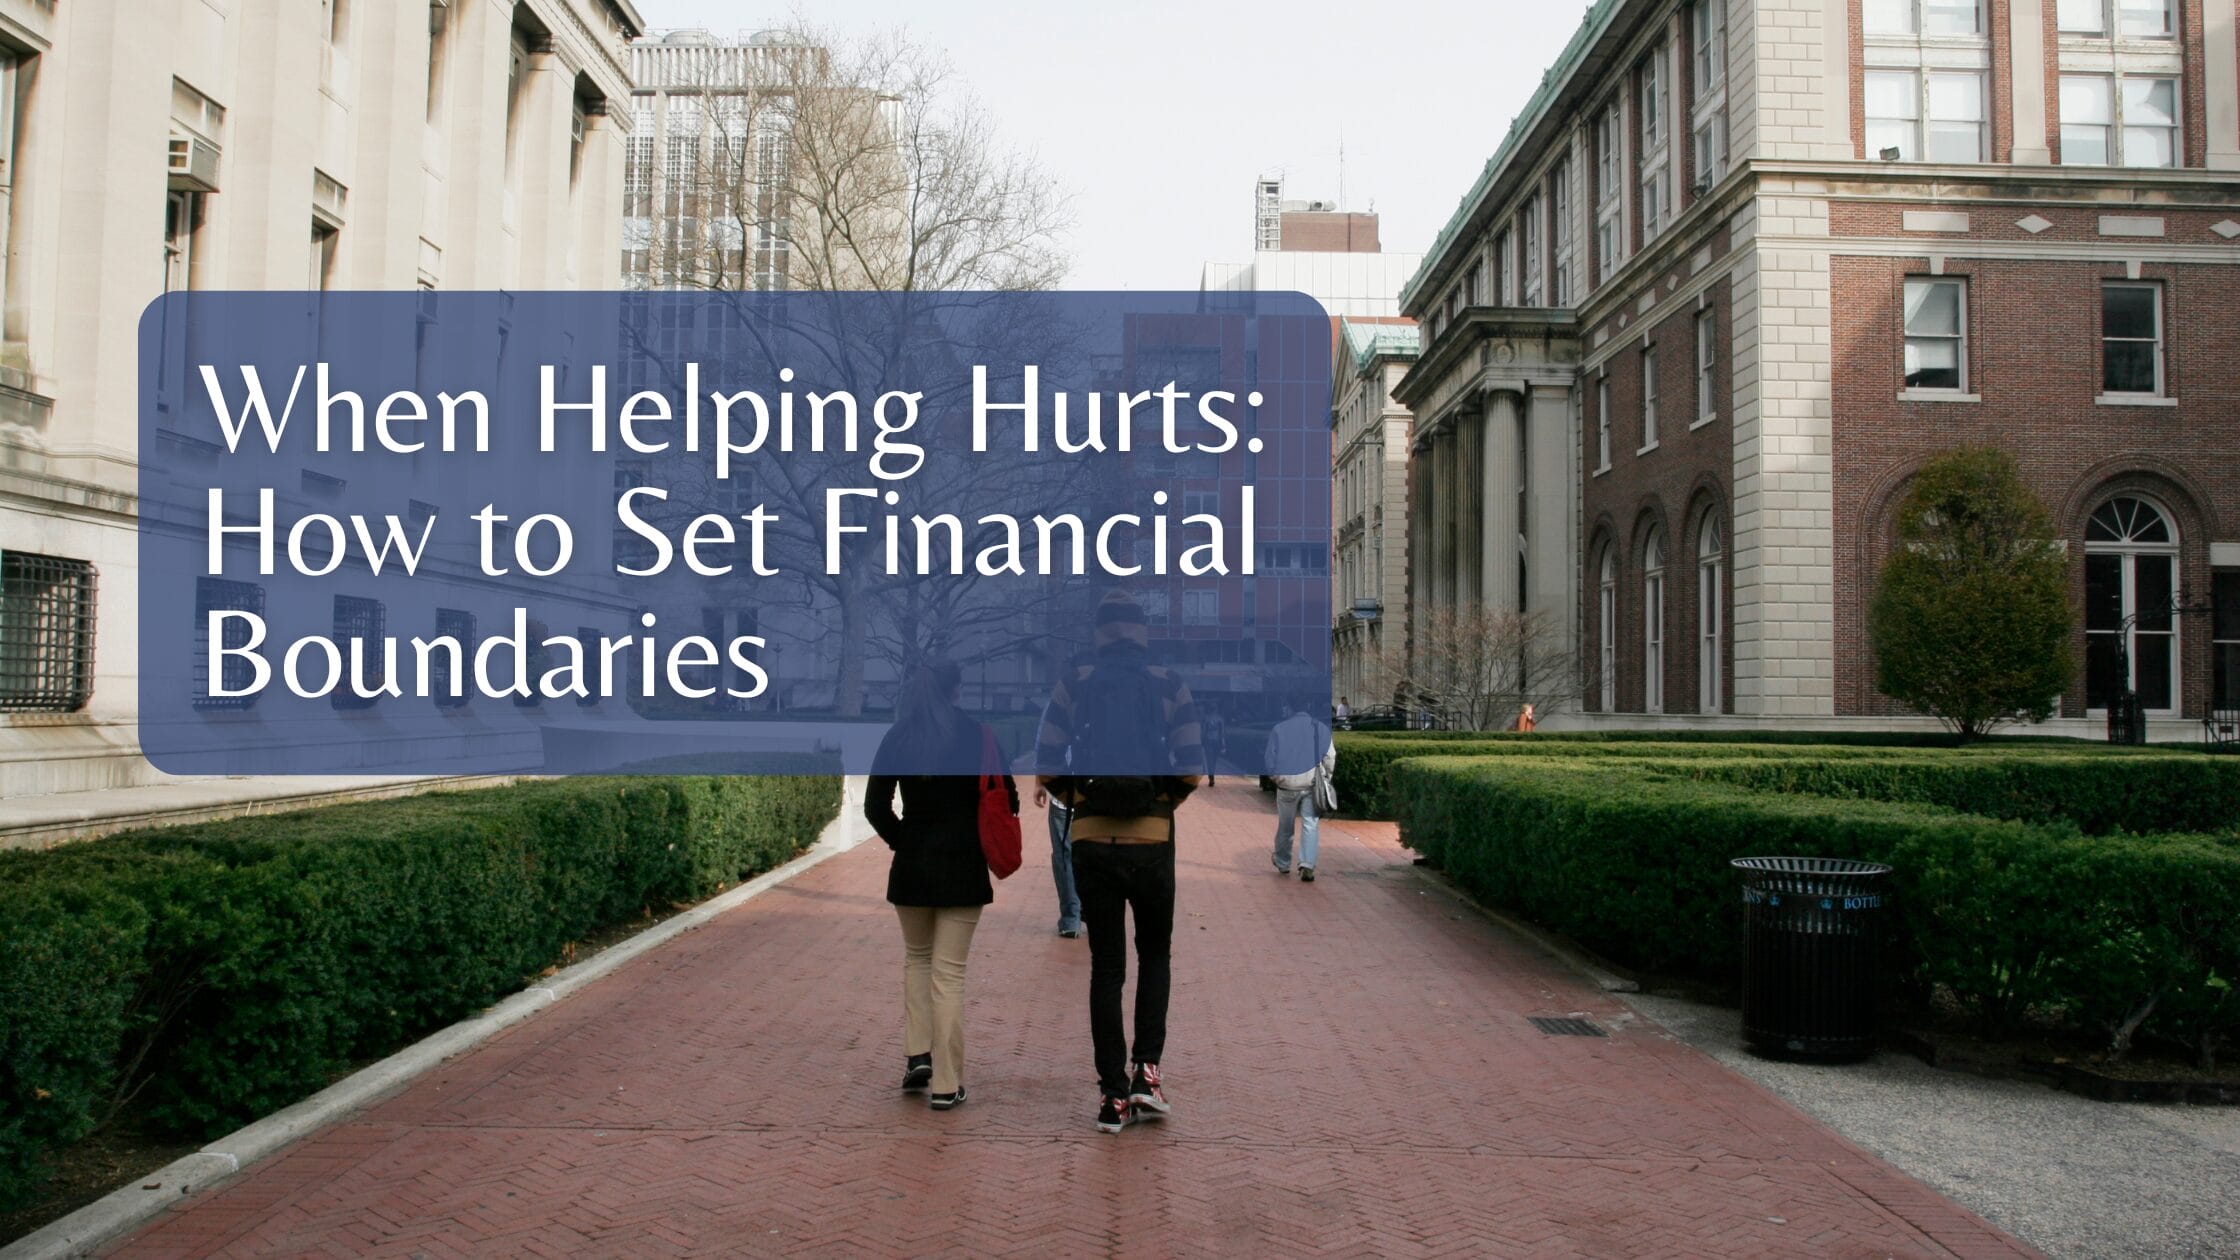 When Helping Hurts: How to Set Financial Boundaries